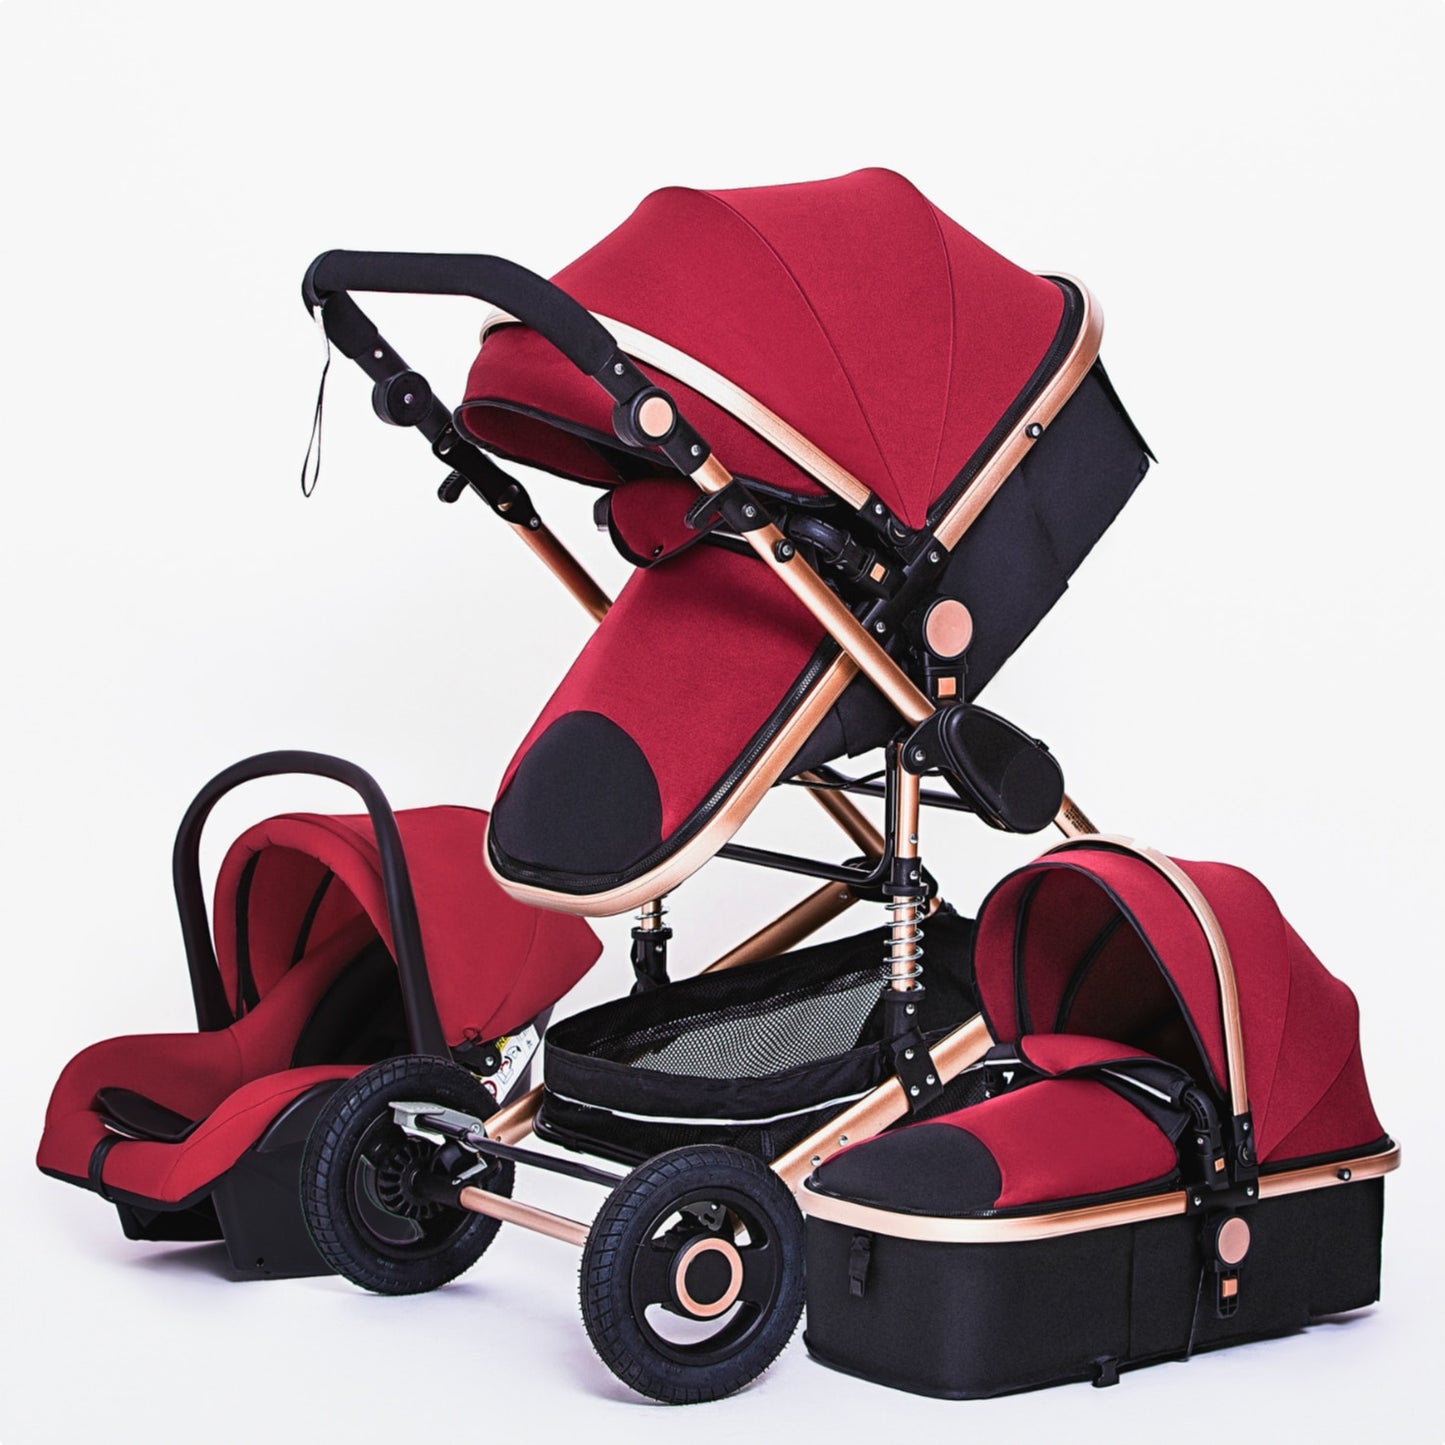 Luxurious Baby Stroller 3 in 1